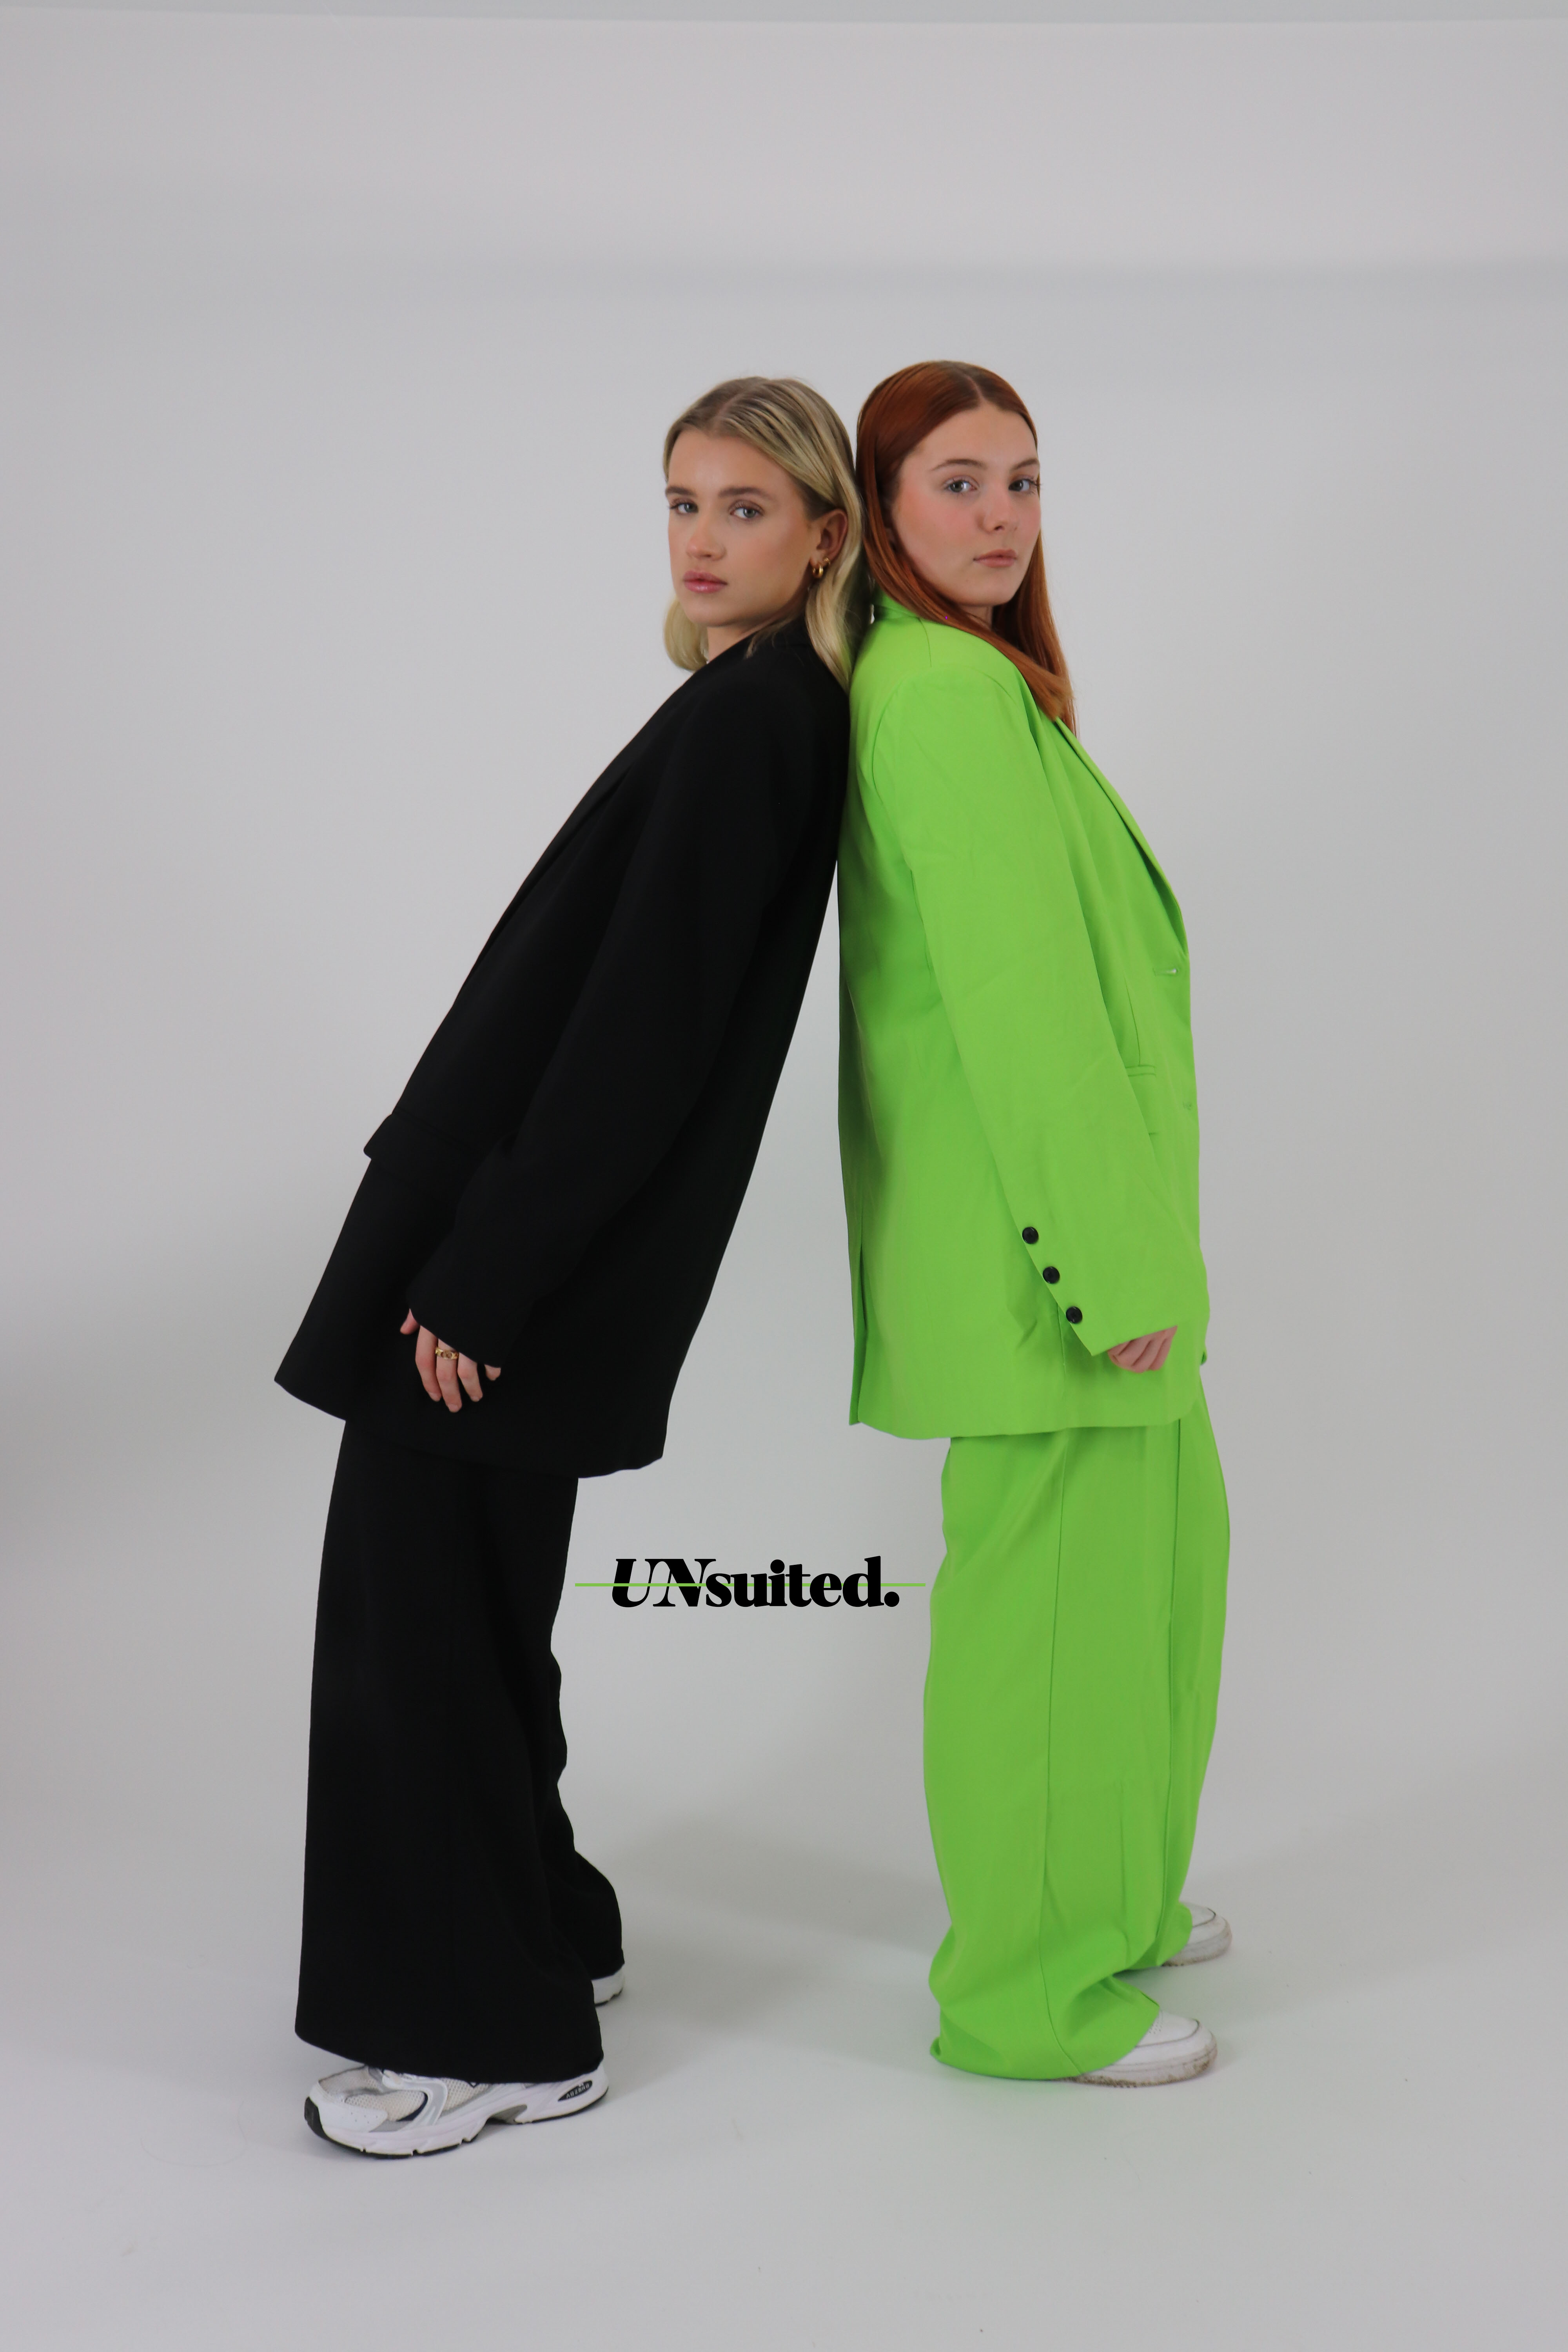 Two models in baggy suits and white trainer lean back to back. The left wears black, the right wears lime green. The text in the middle reads 'UNsuited'